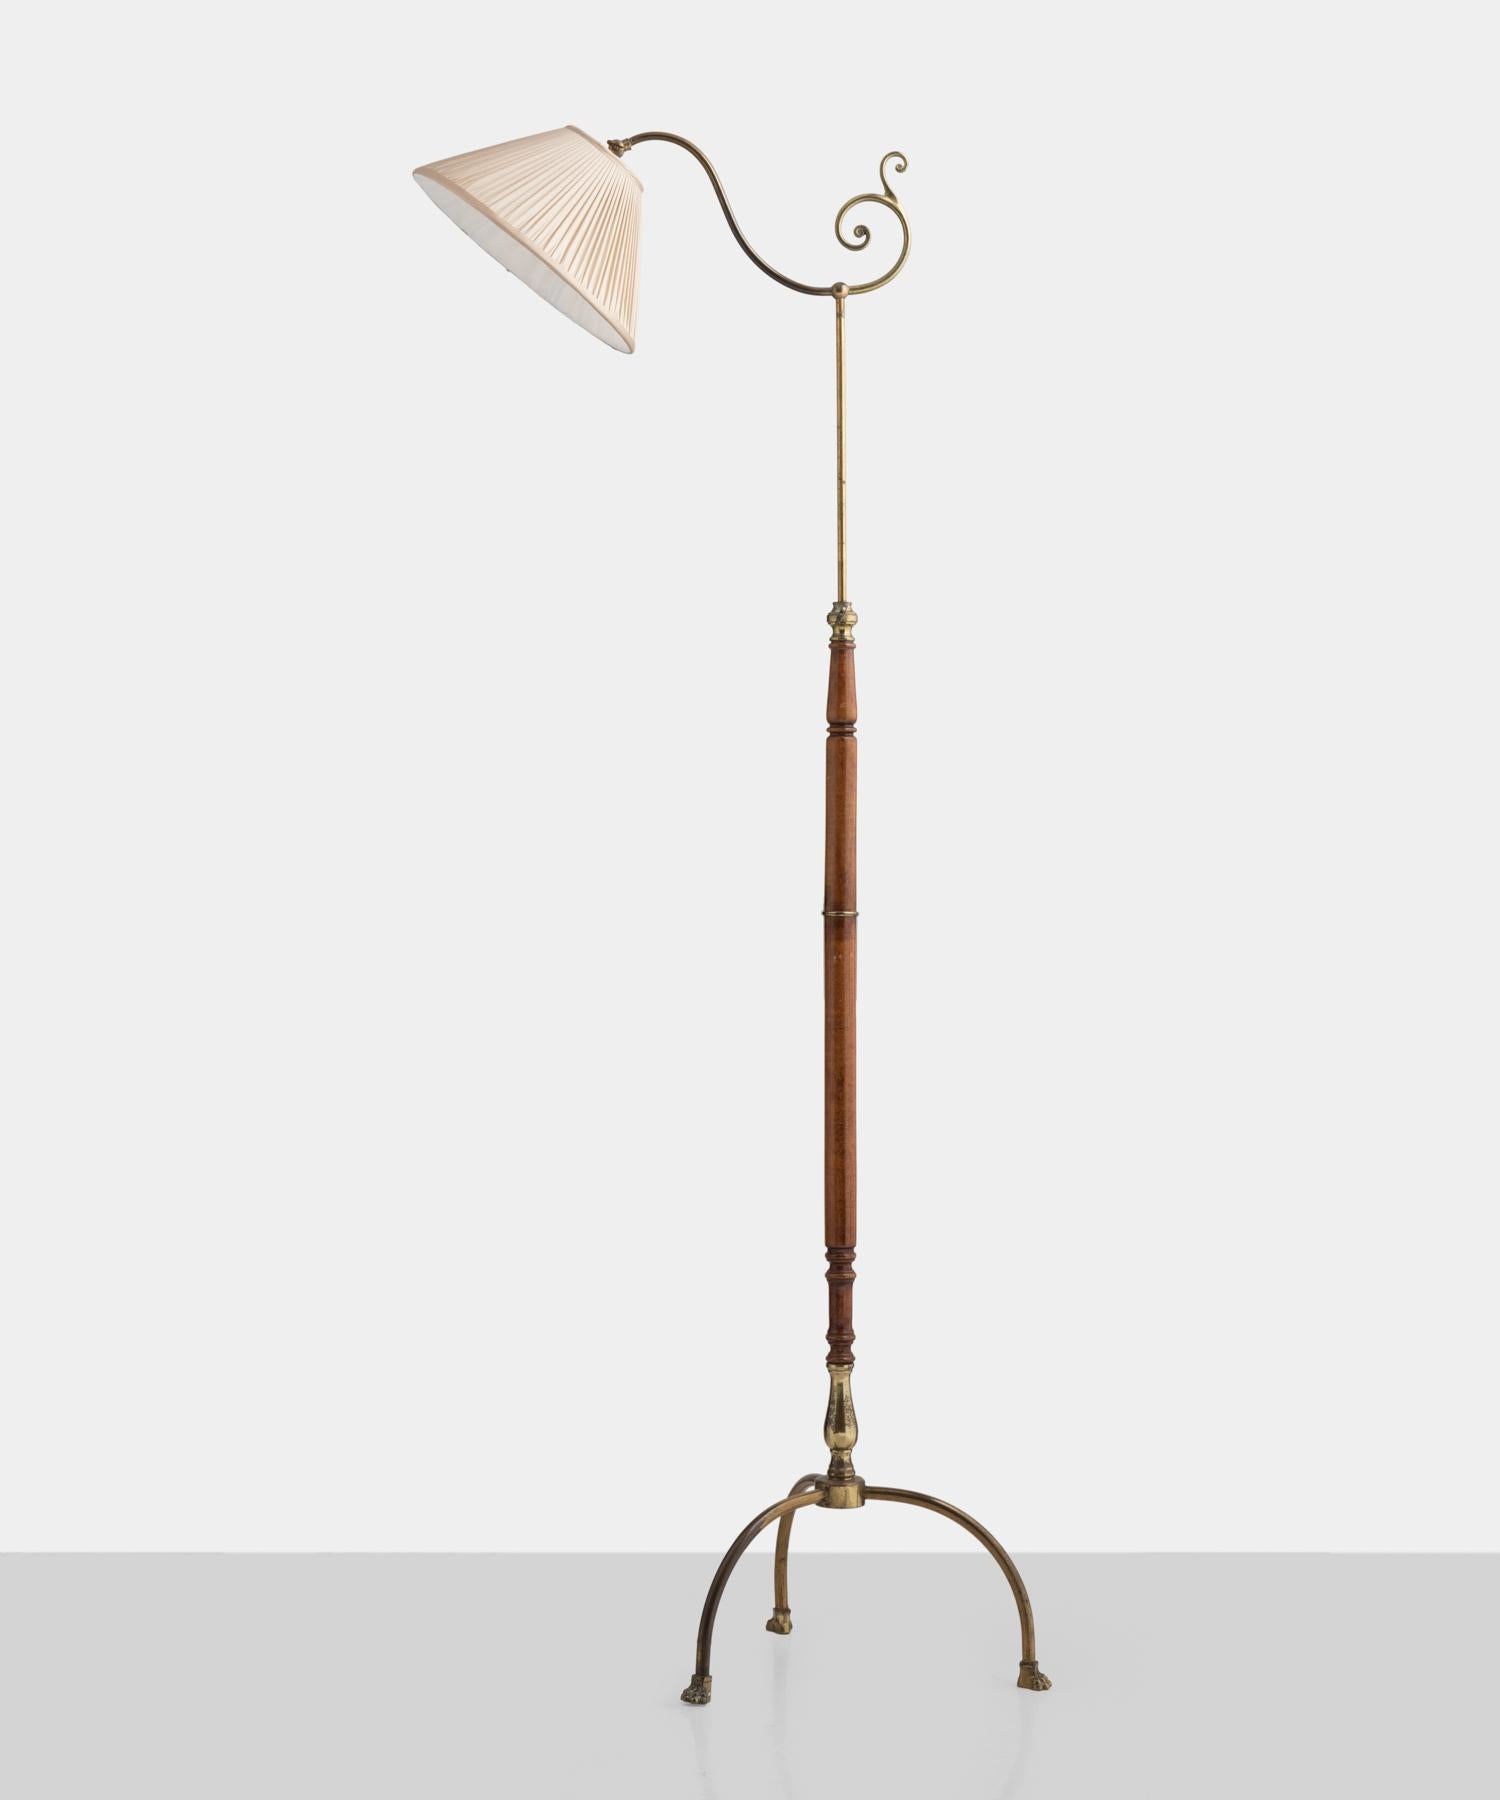 Adjustable Reading Lamp with Claw Feet, France, circa 1930 (Französisch)